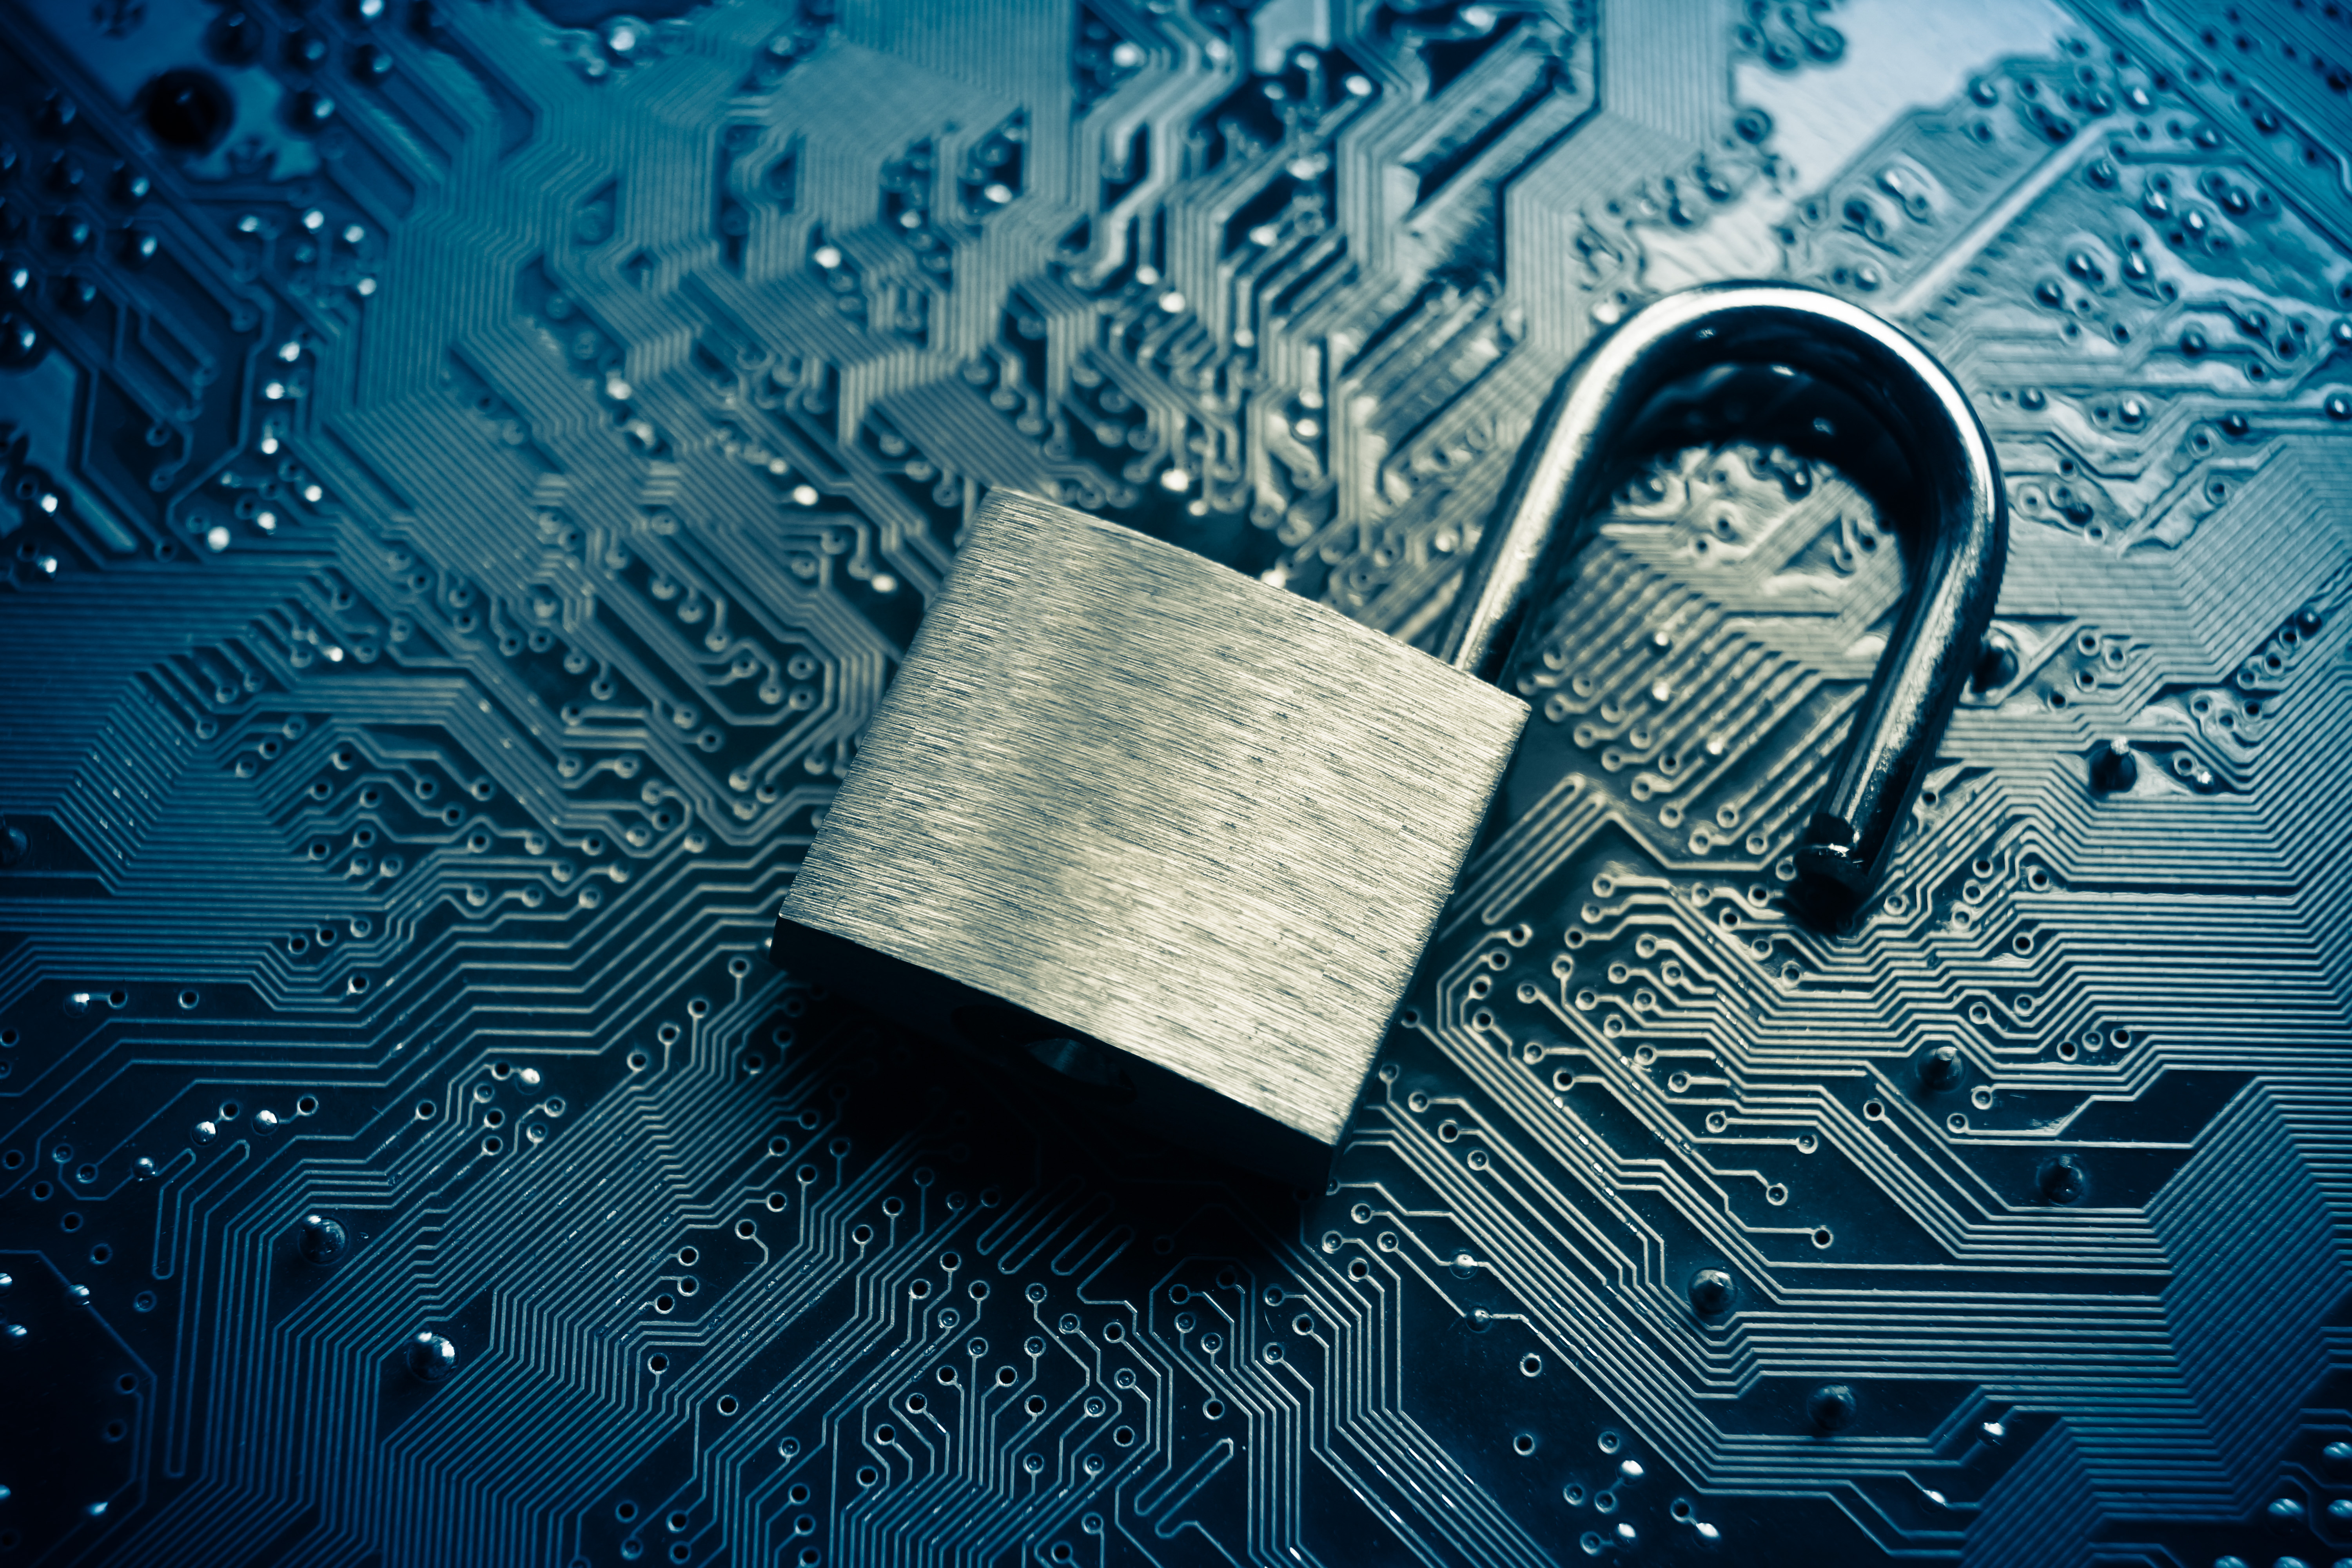 Follow these best practices to prevent cyber security breaches.